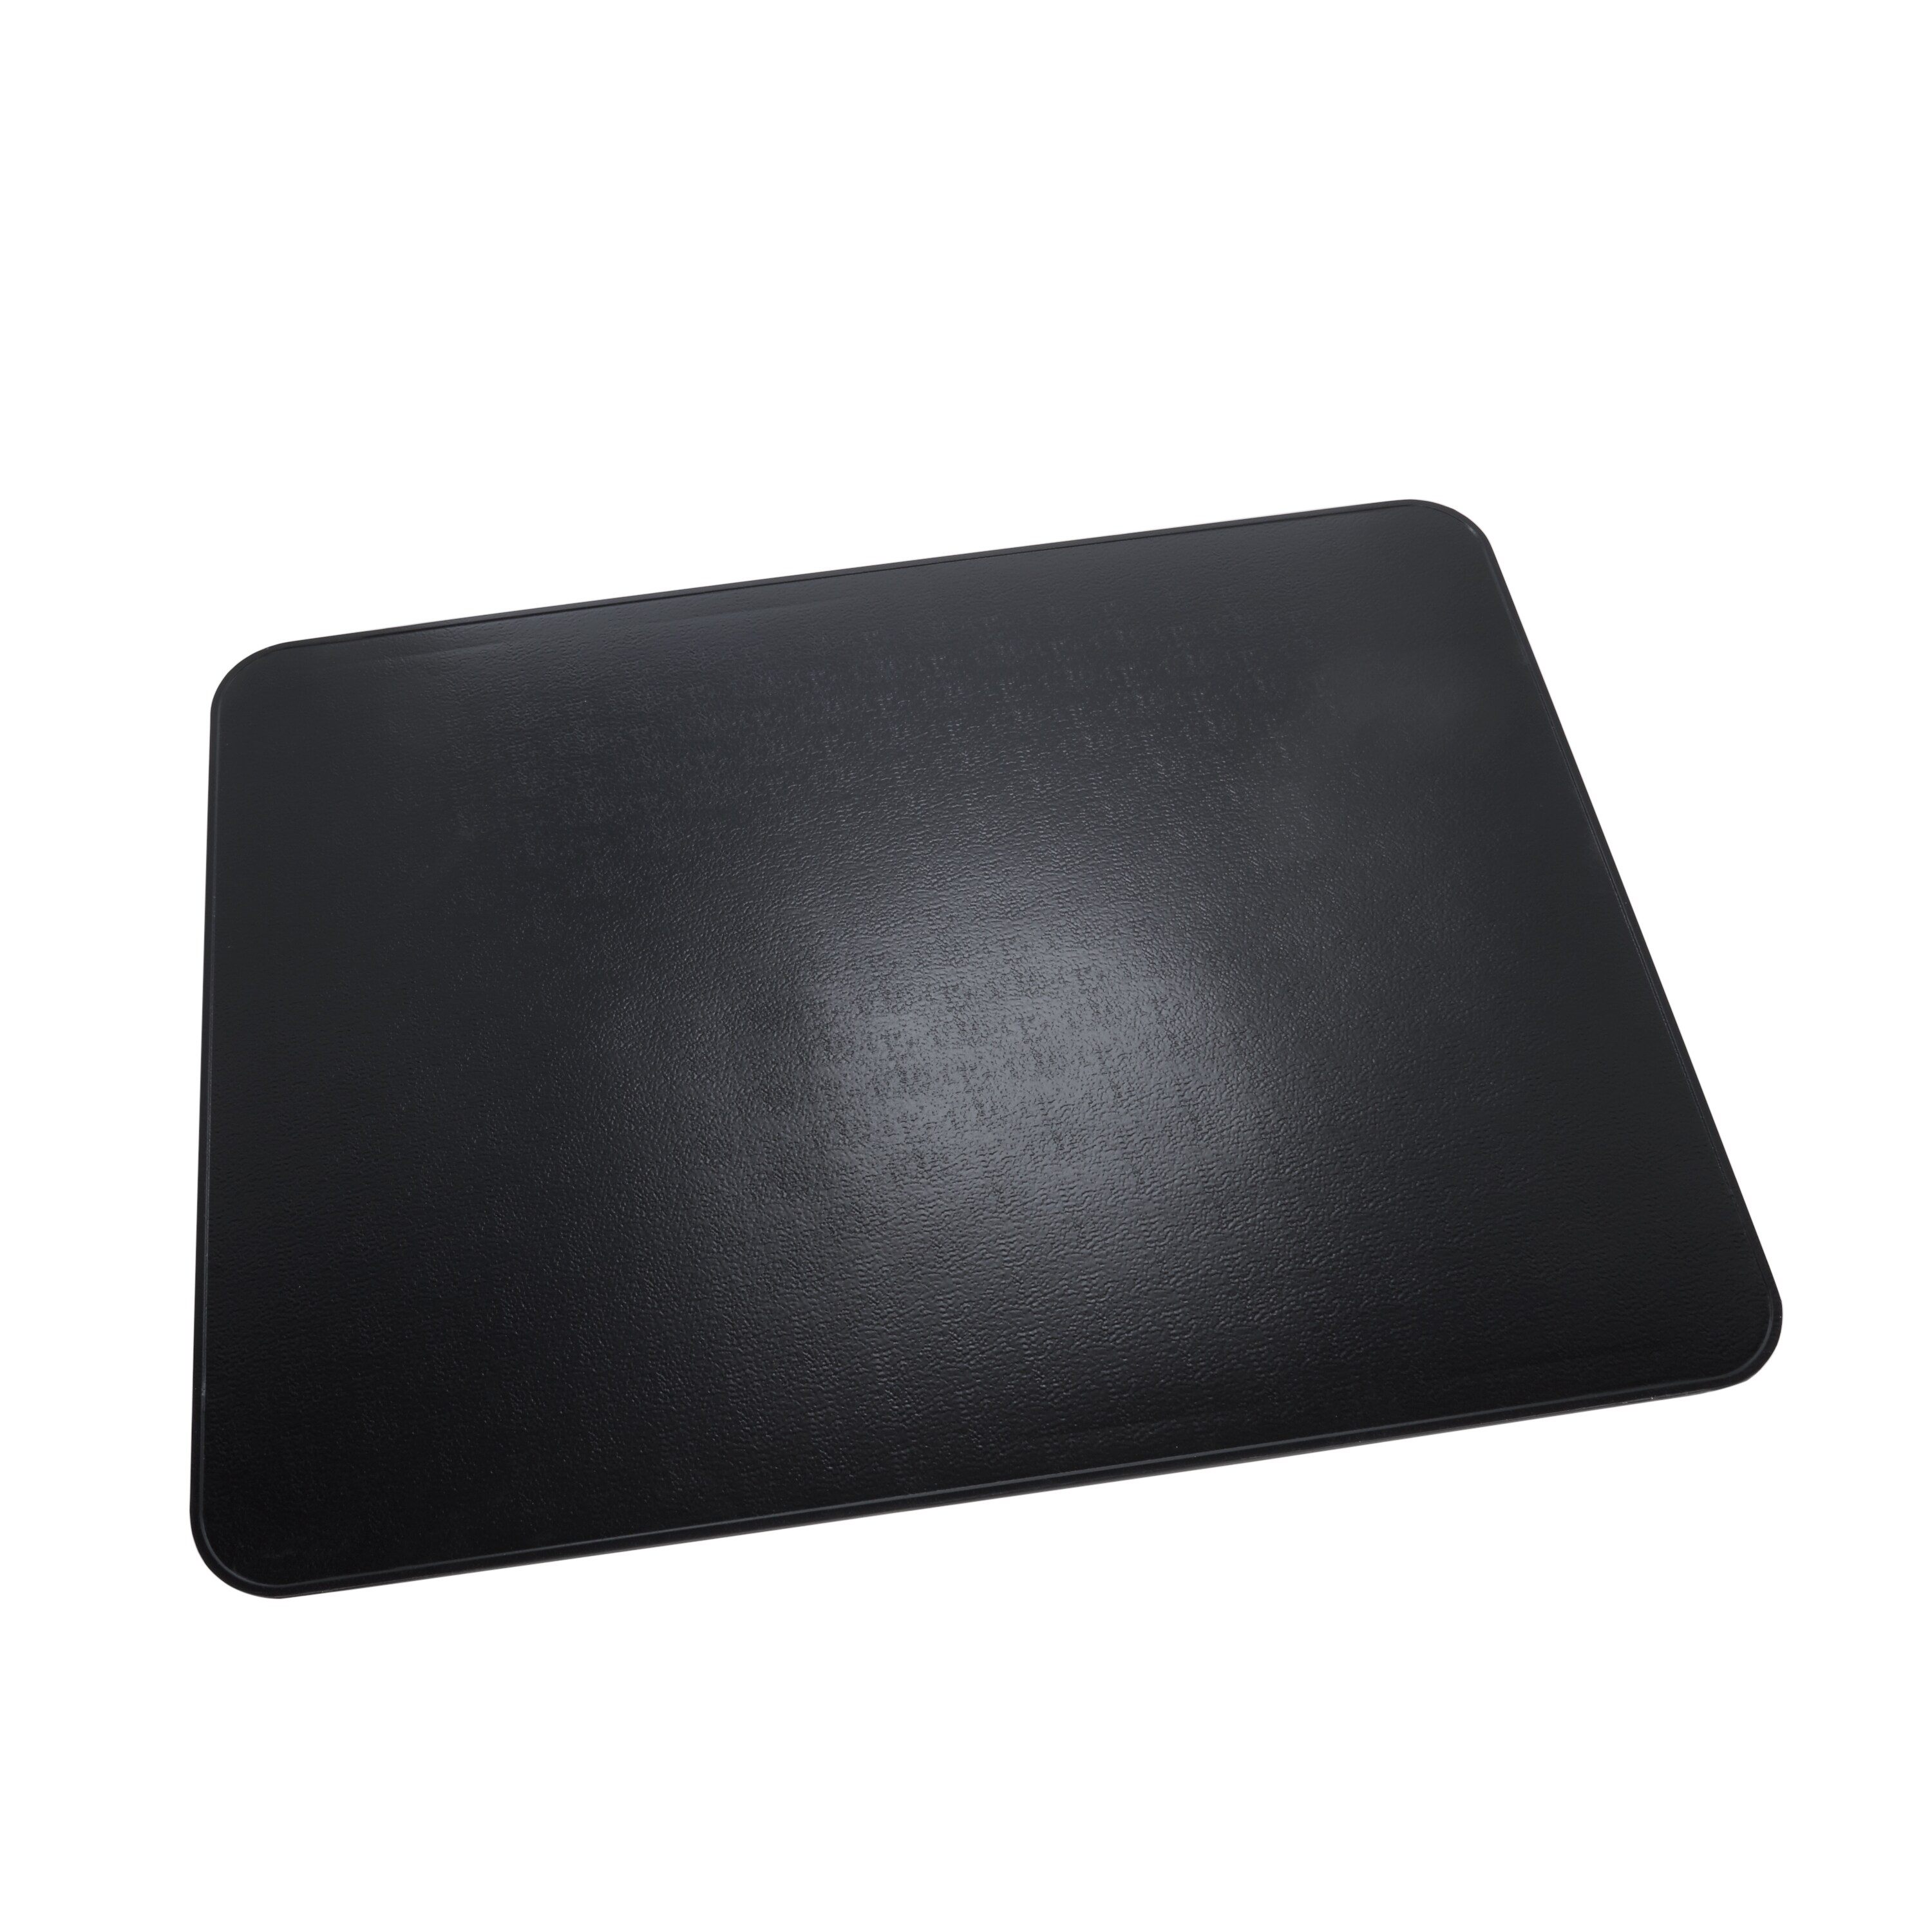 HY-C Black Stove Board - Wood & Pellet Stove Accessories - Protects Floors  and Walls - Versatile Heat Shield in the Wood & Pellet Stove Accessories  department at